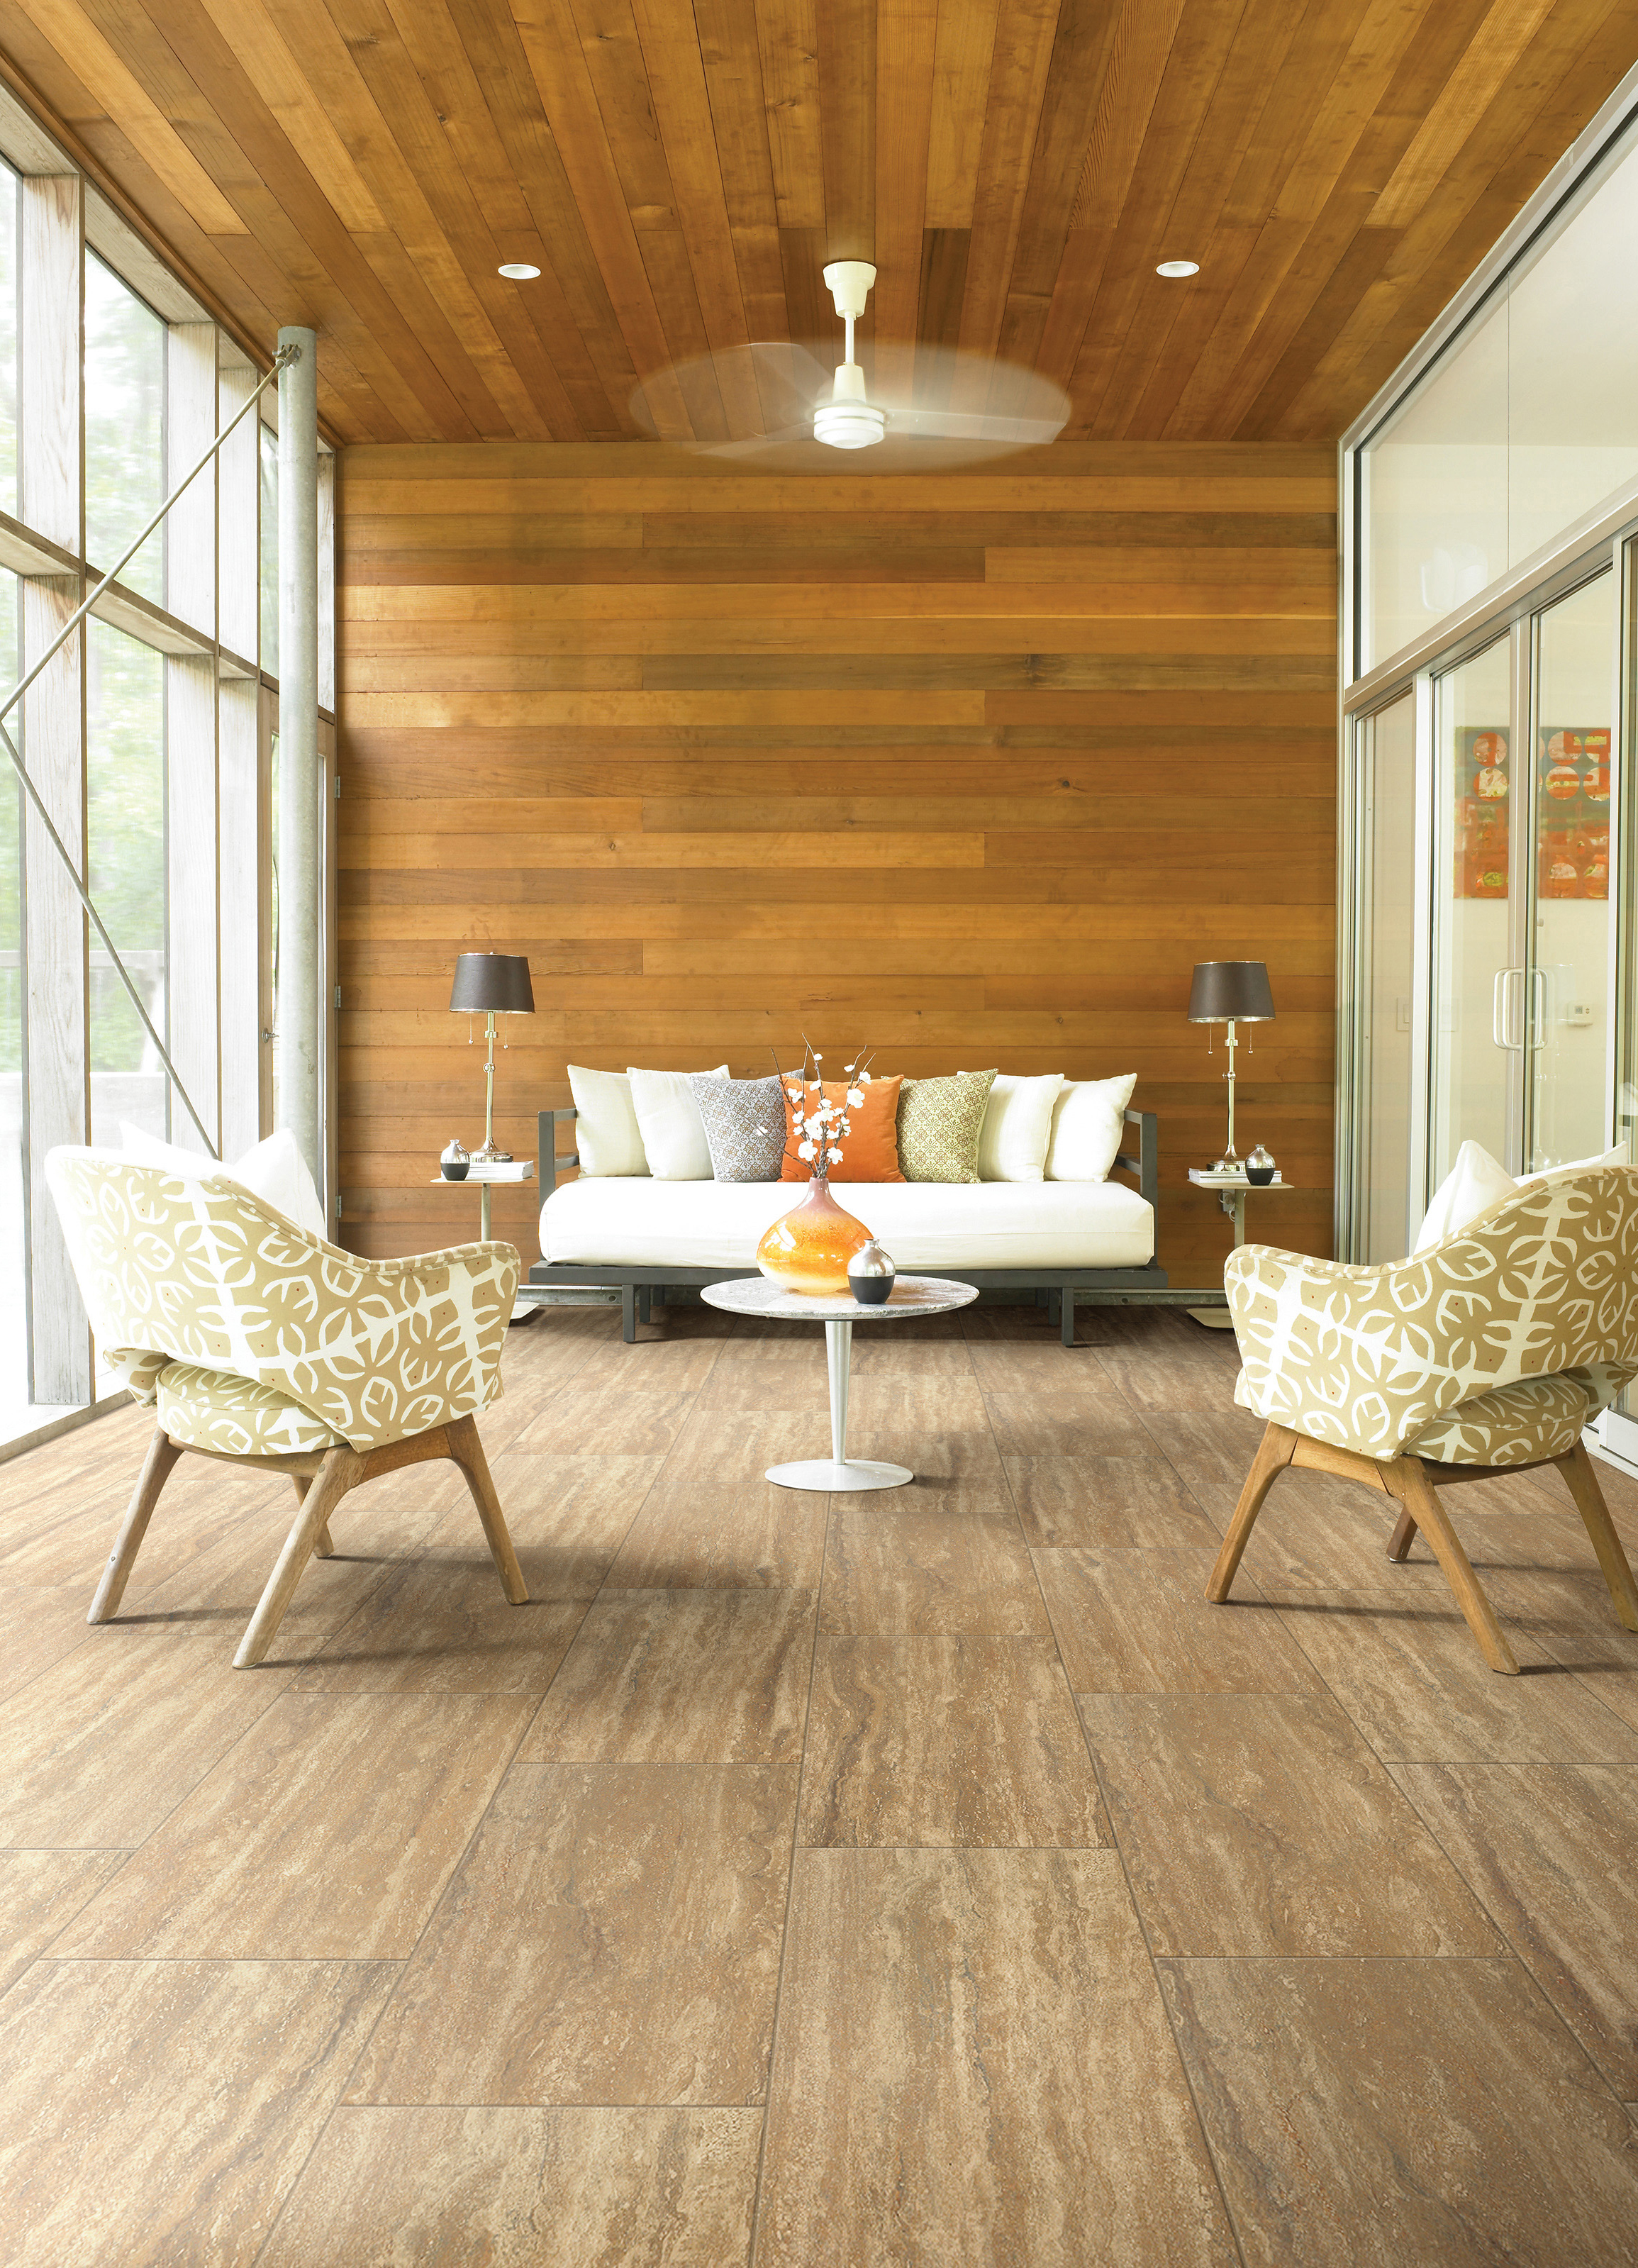 Sophia Dorado wood-look tile in porch setting. White arm chairs, couch, small table, and wooded walls present.